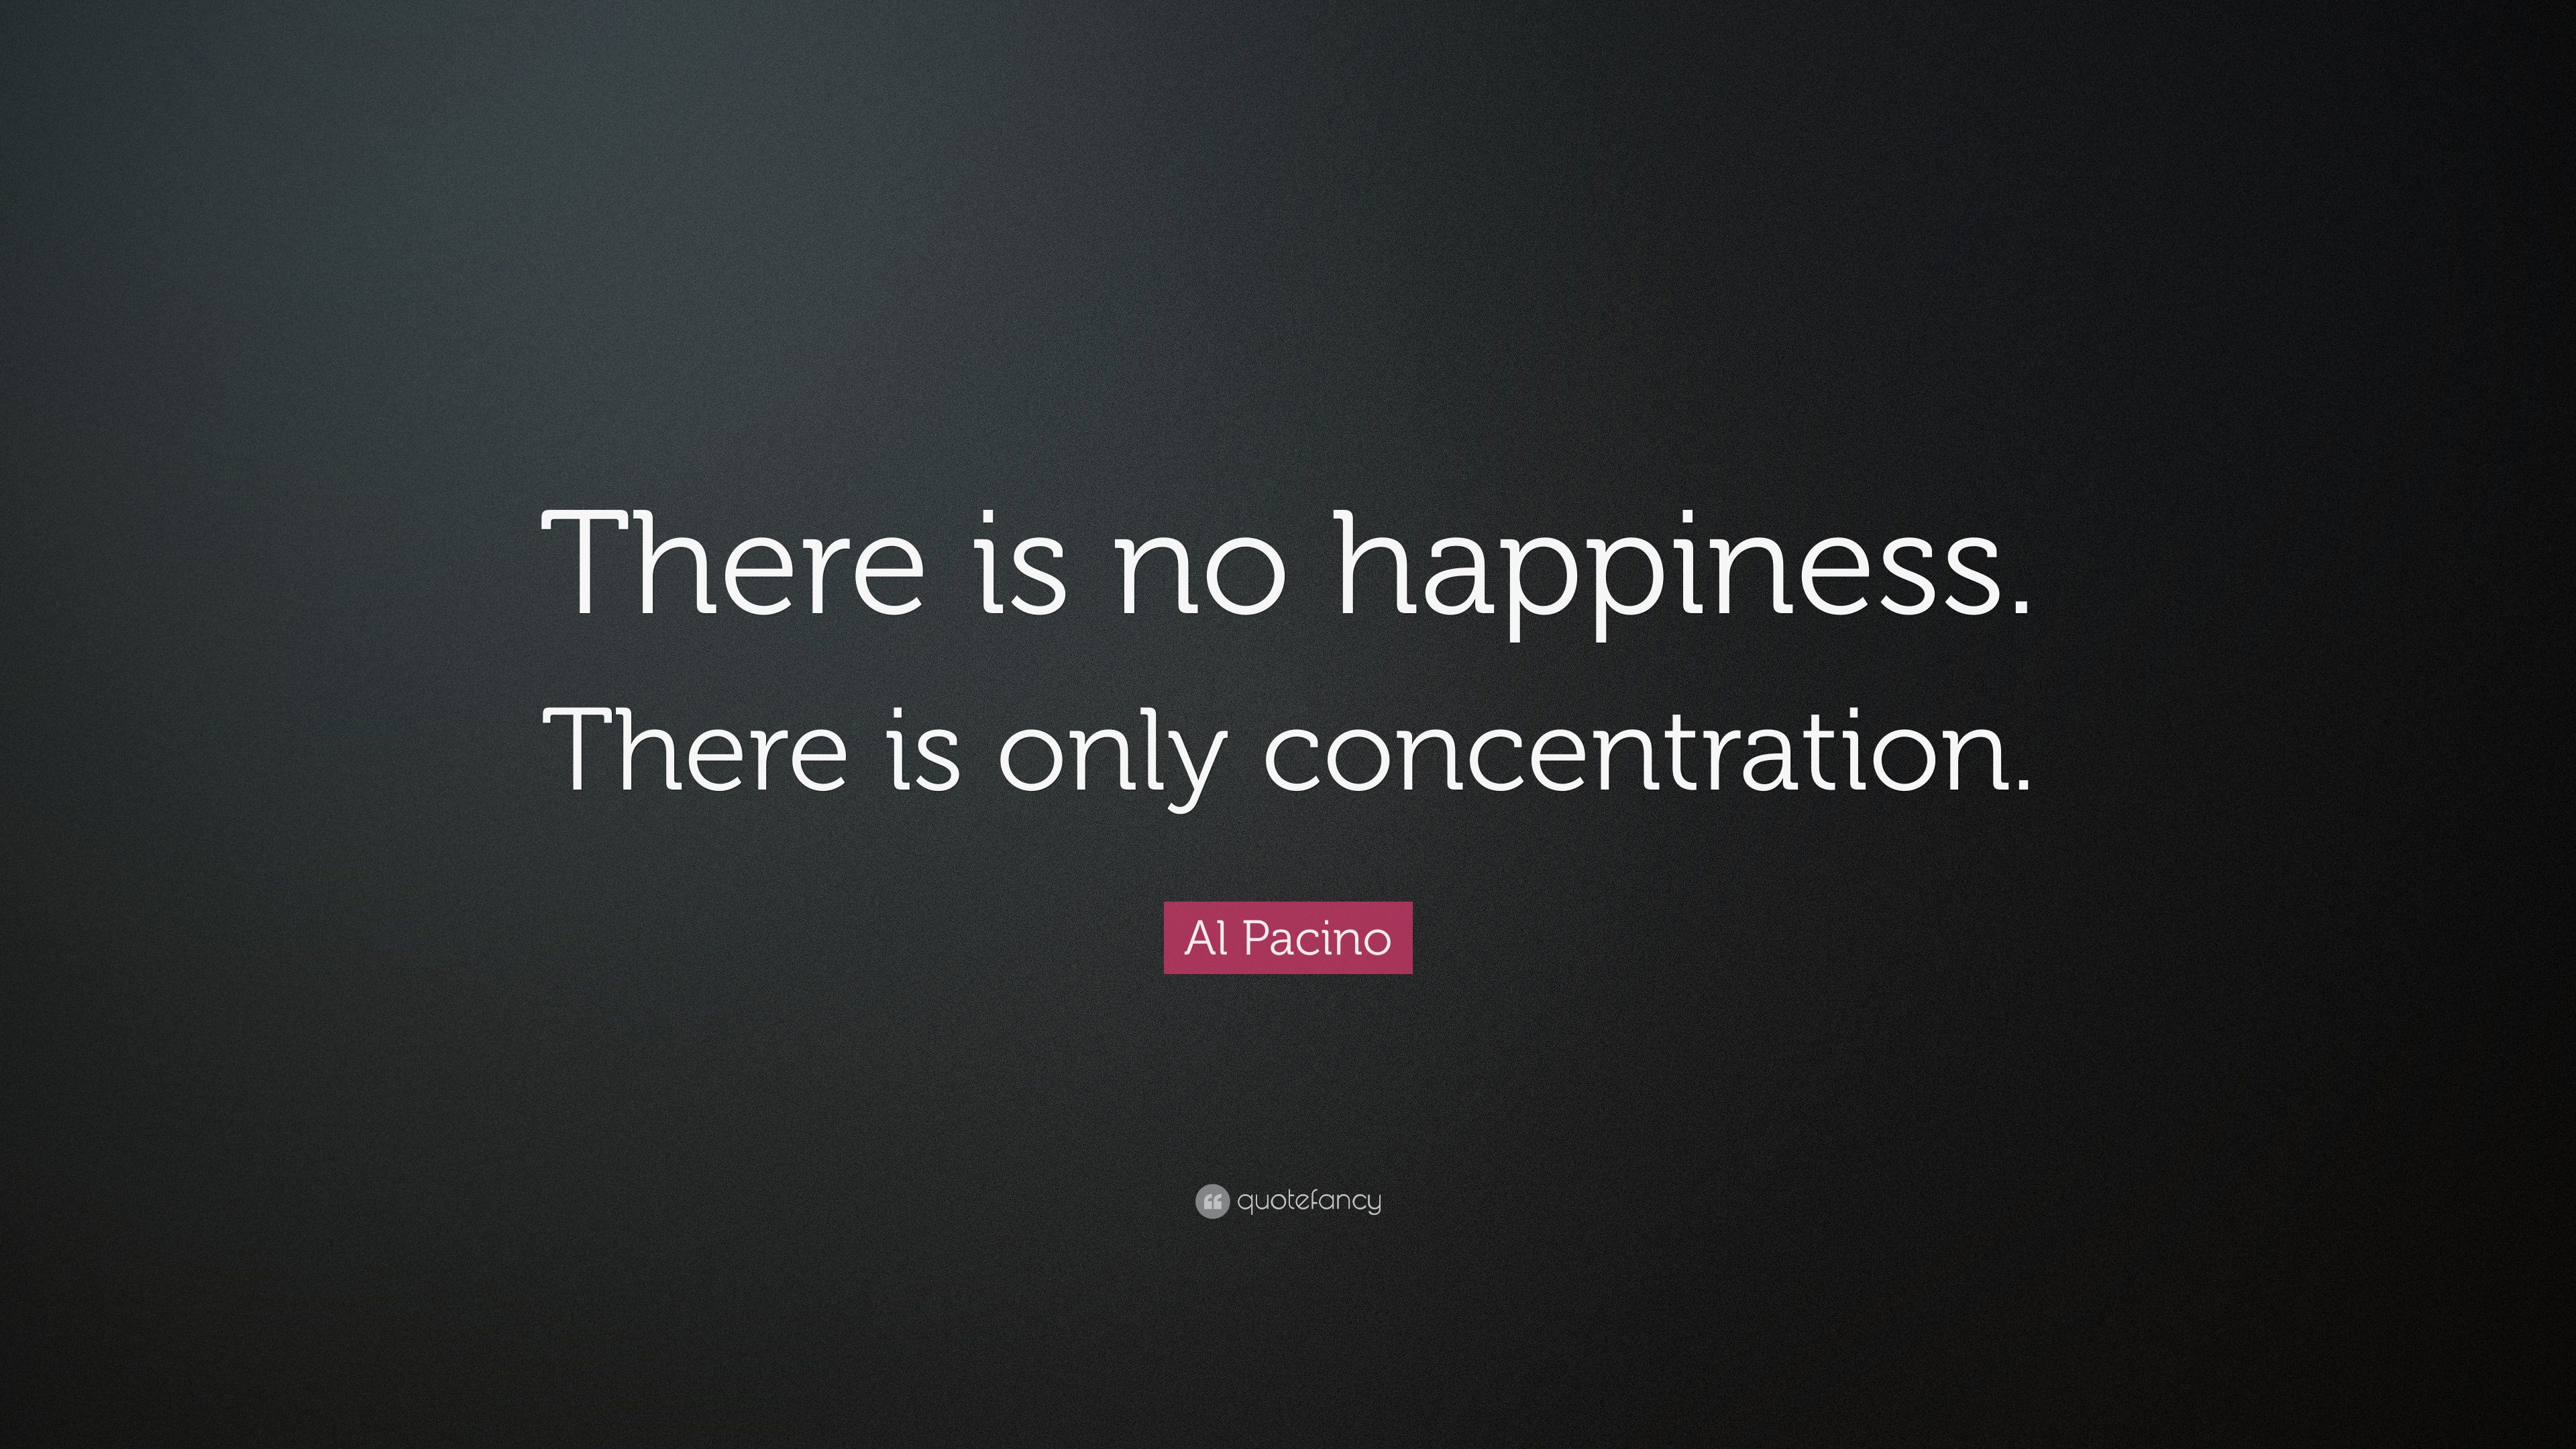 Al Pacino Quote: “There is no happiness .quotefancy.com